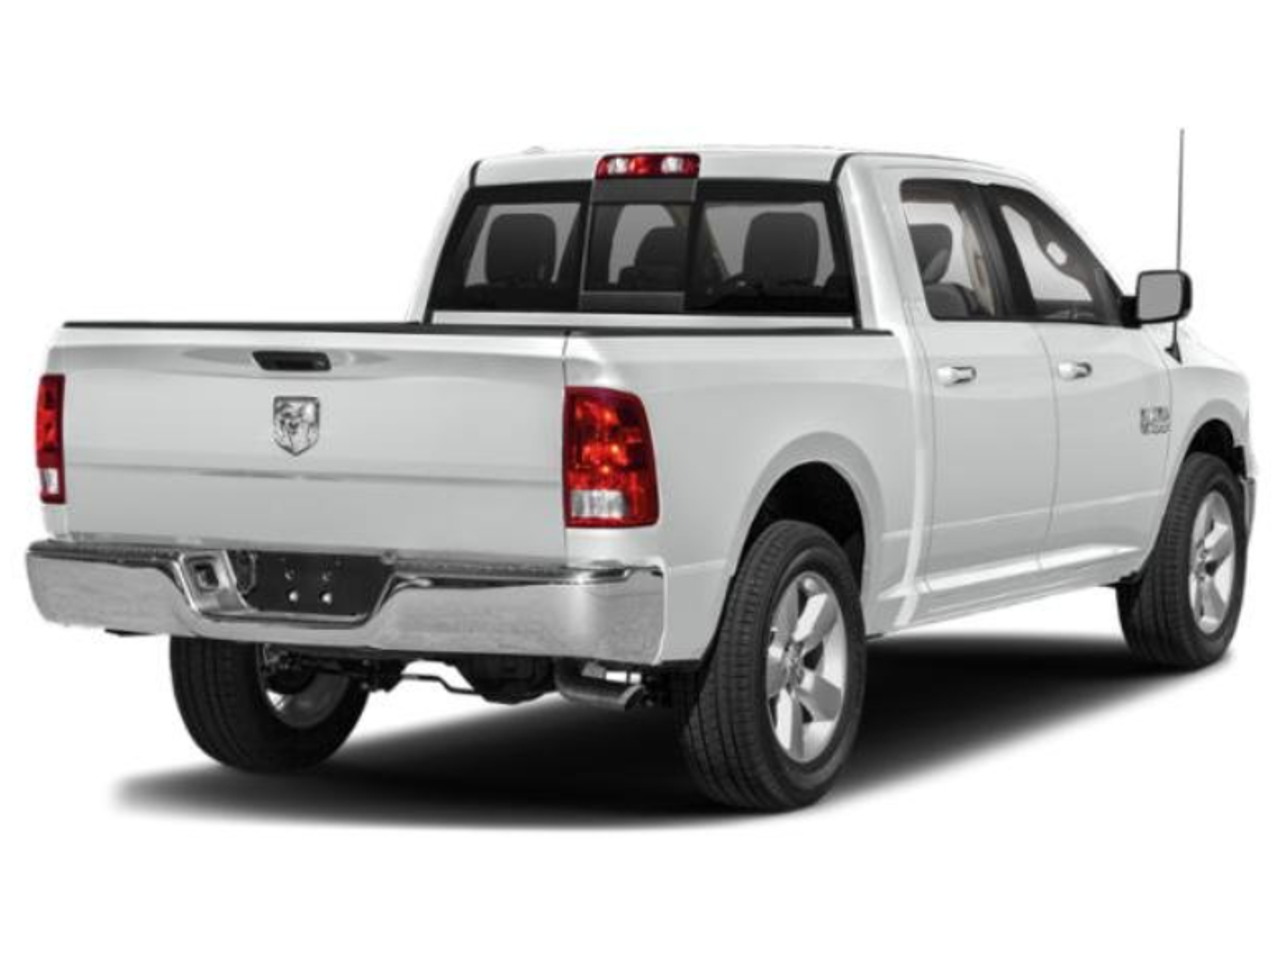 New 2023 White Dodge Ram 1500 SSV 4x4 Truck, ready to be built as an Admin Package (Emergency Lighting, Siren, Controller,  Console, etc.), + Delivery, 23RAMA4